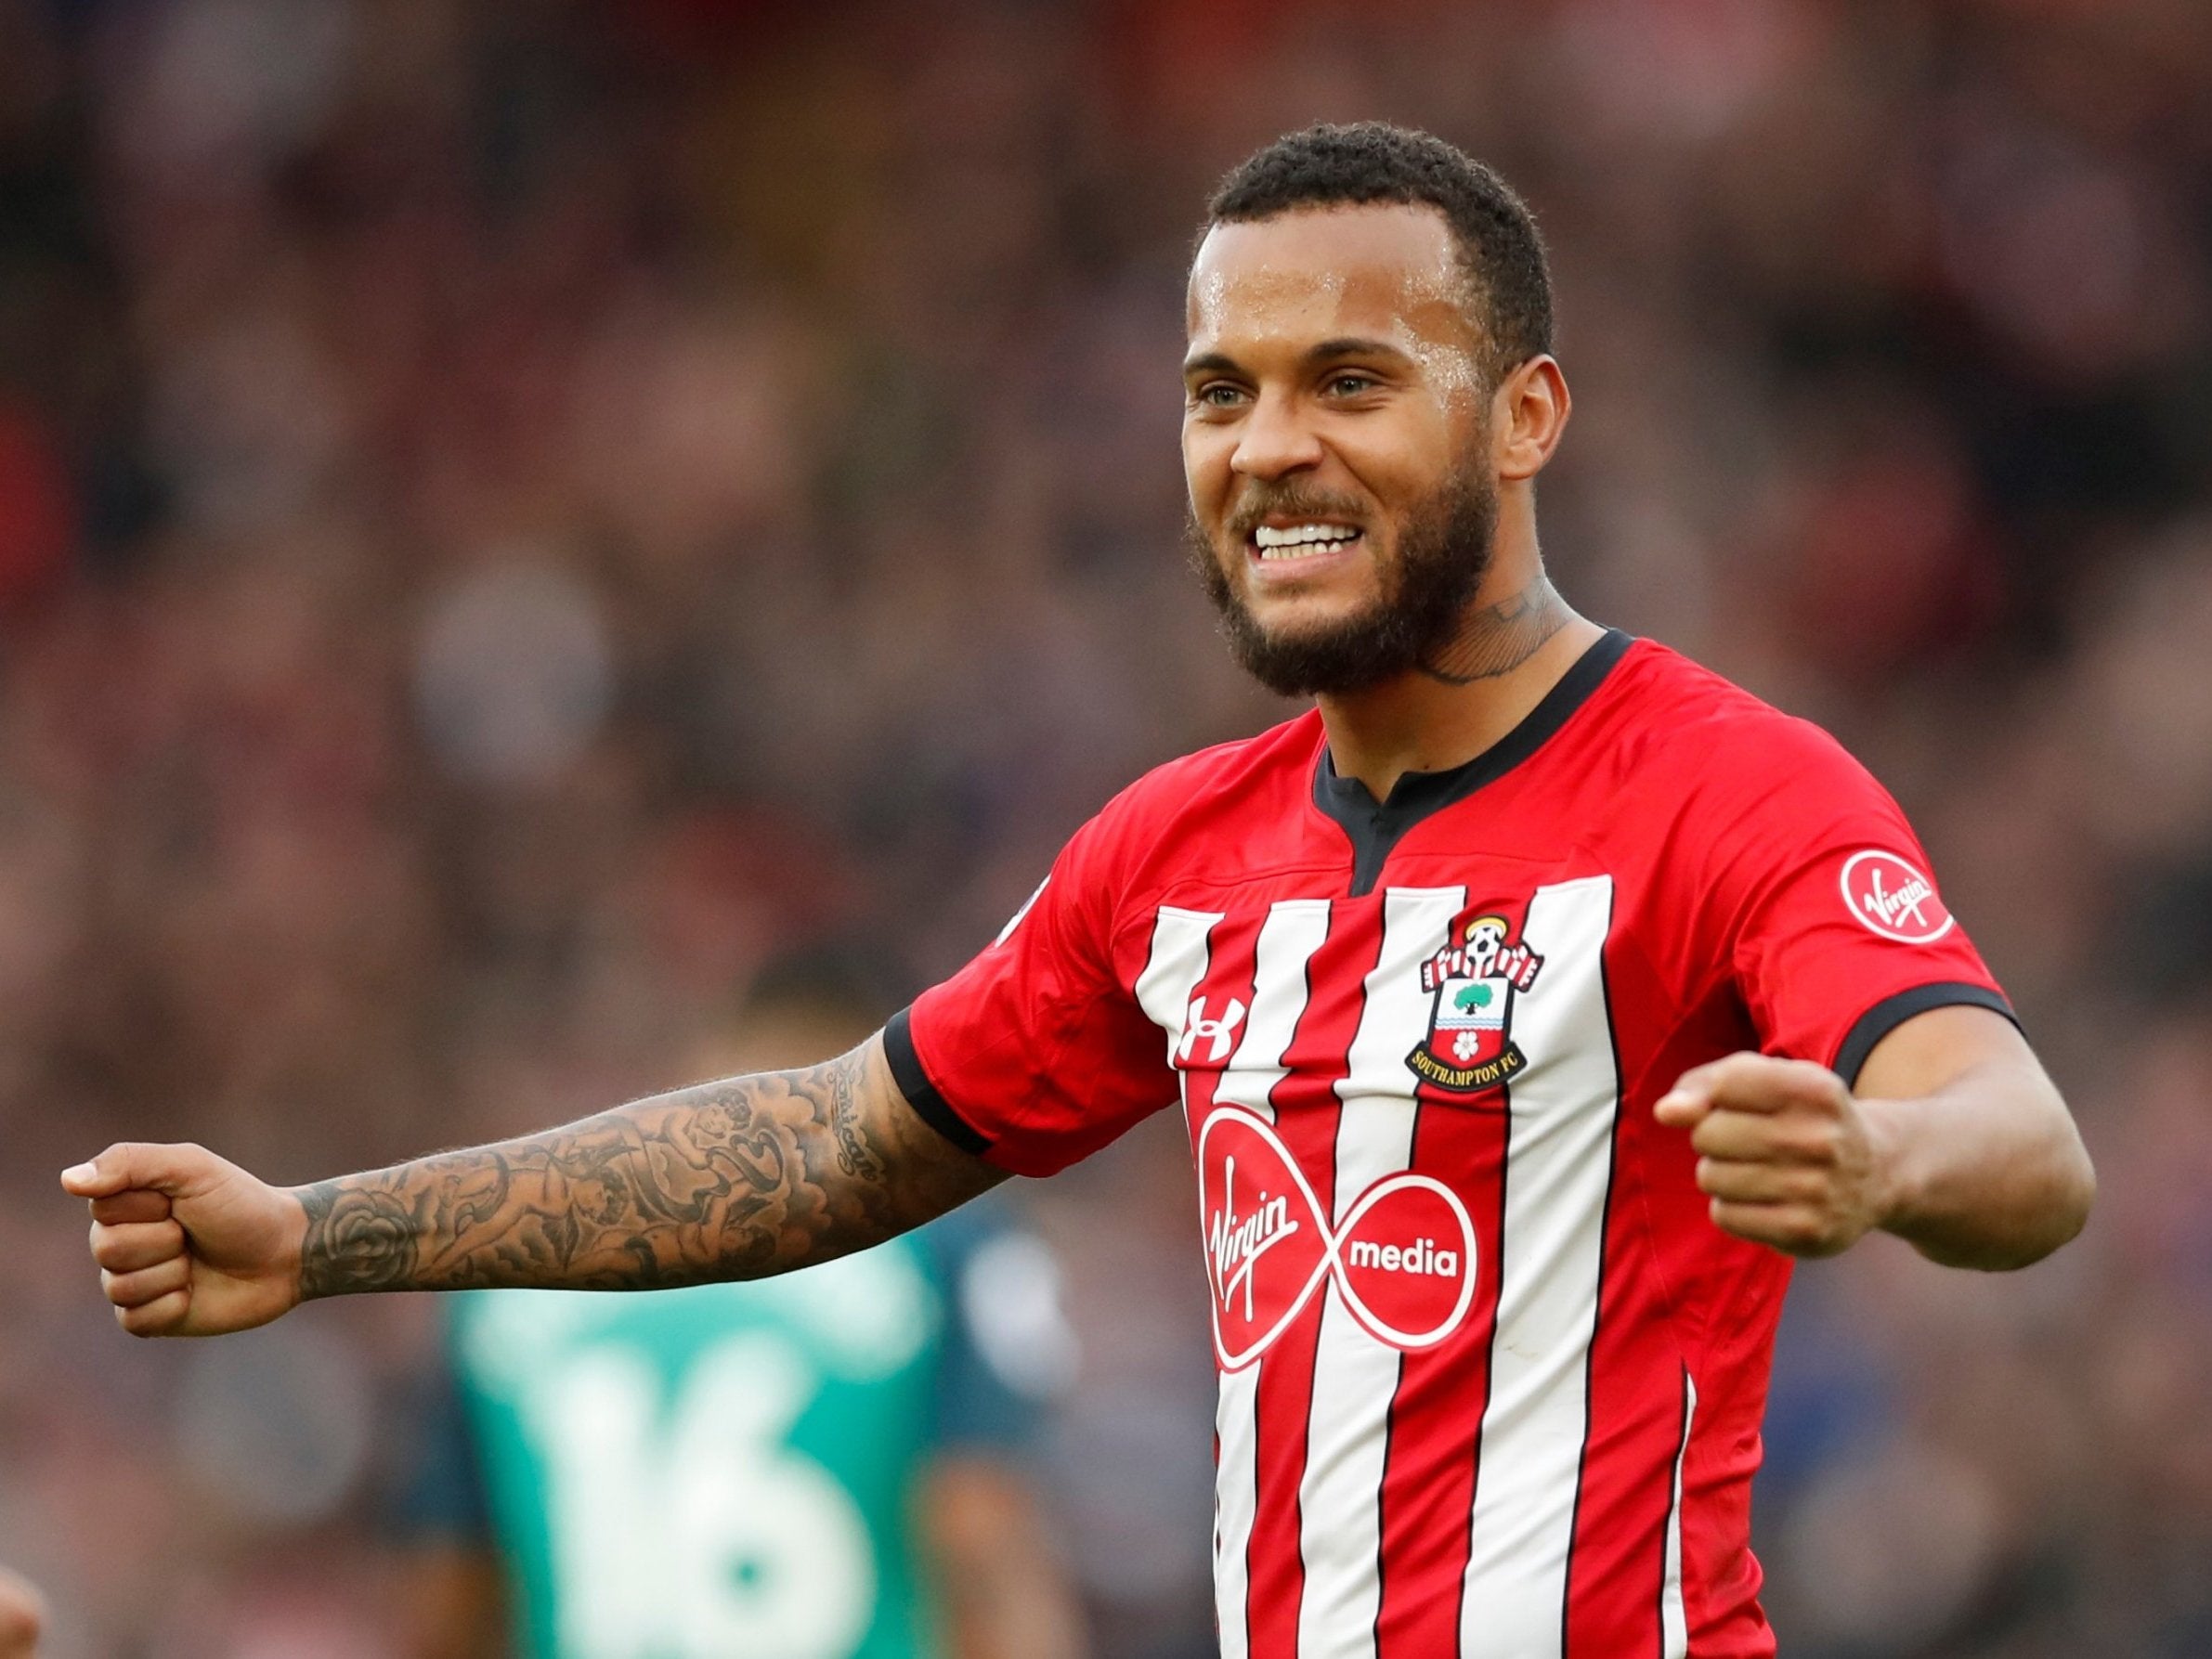 Ryan Bertrand is excited to face Liverpool